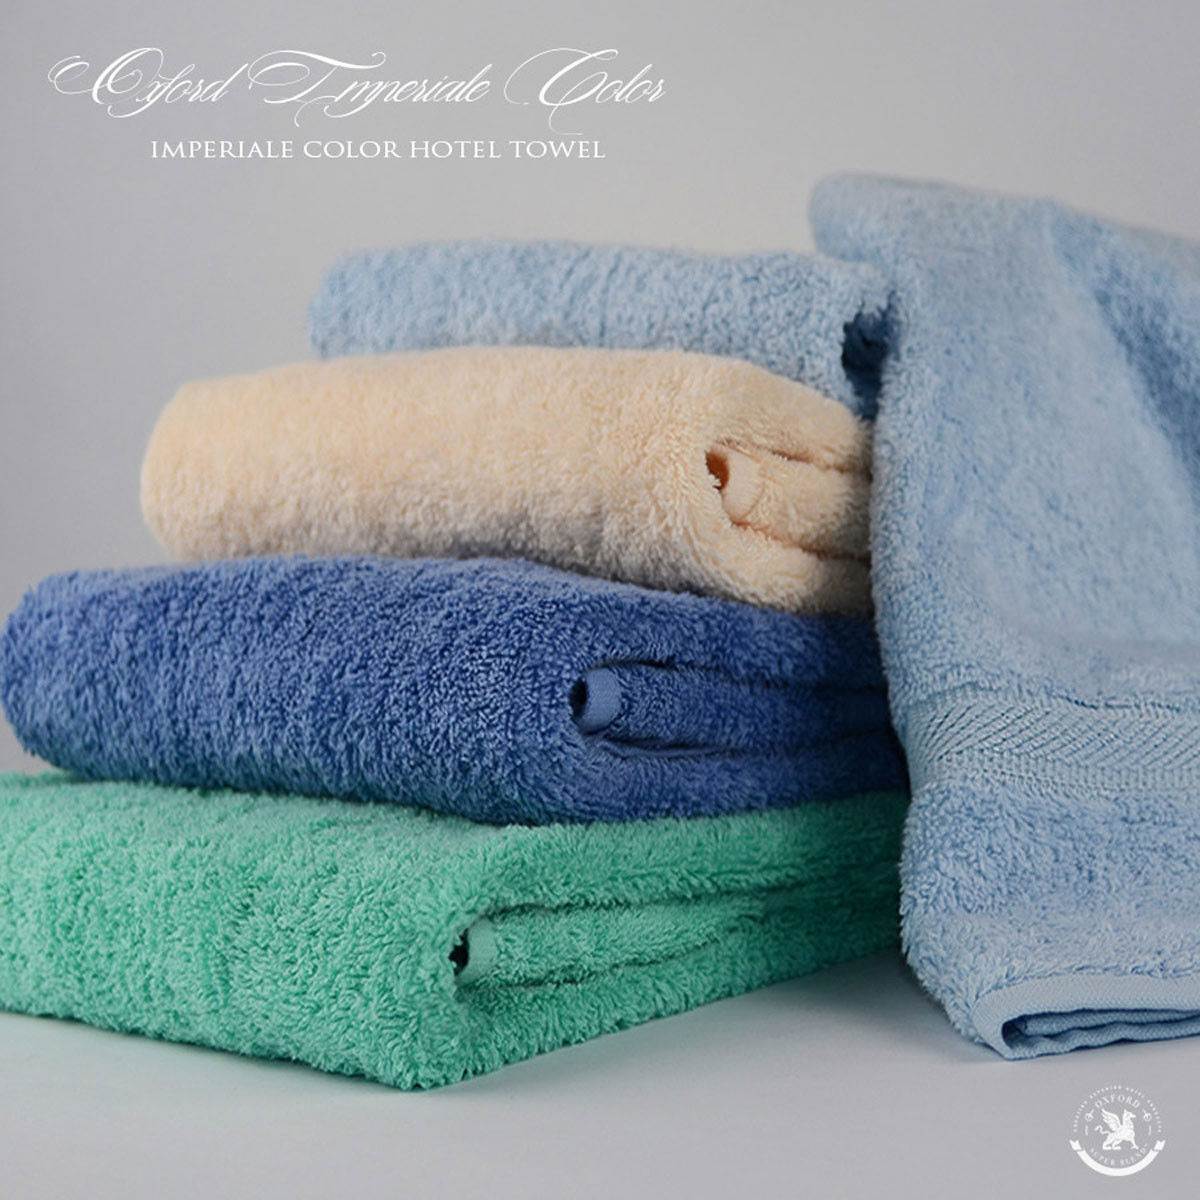 How do Oxford towels, specifically the Imperiale Kashmir Green, match up against other brands?